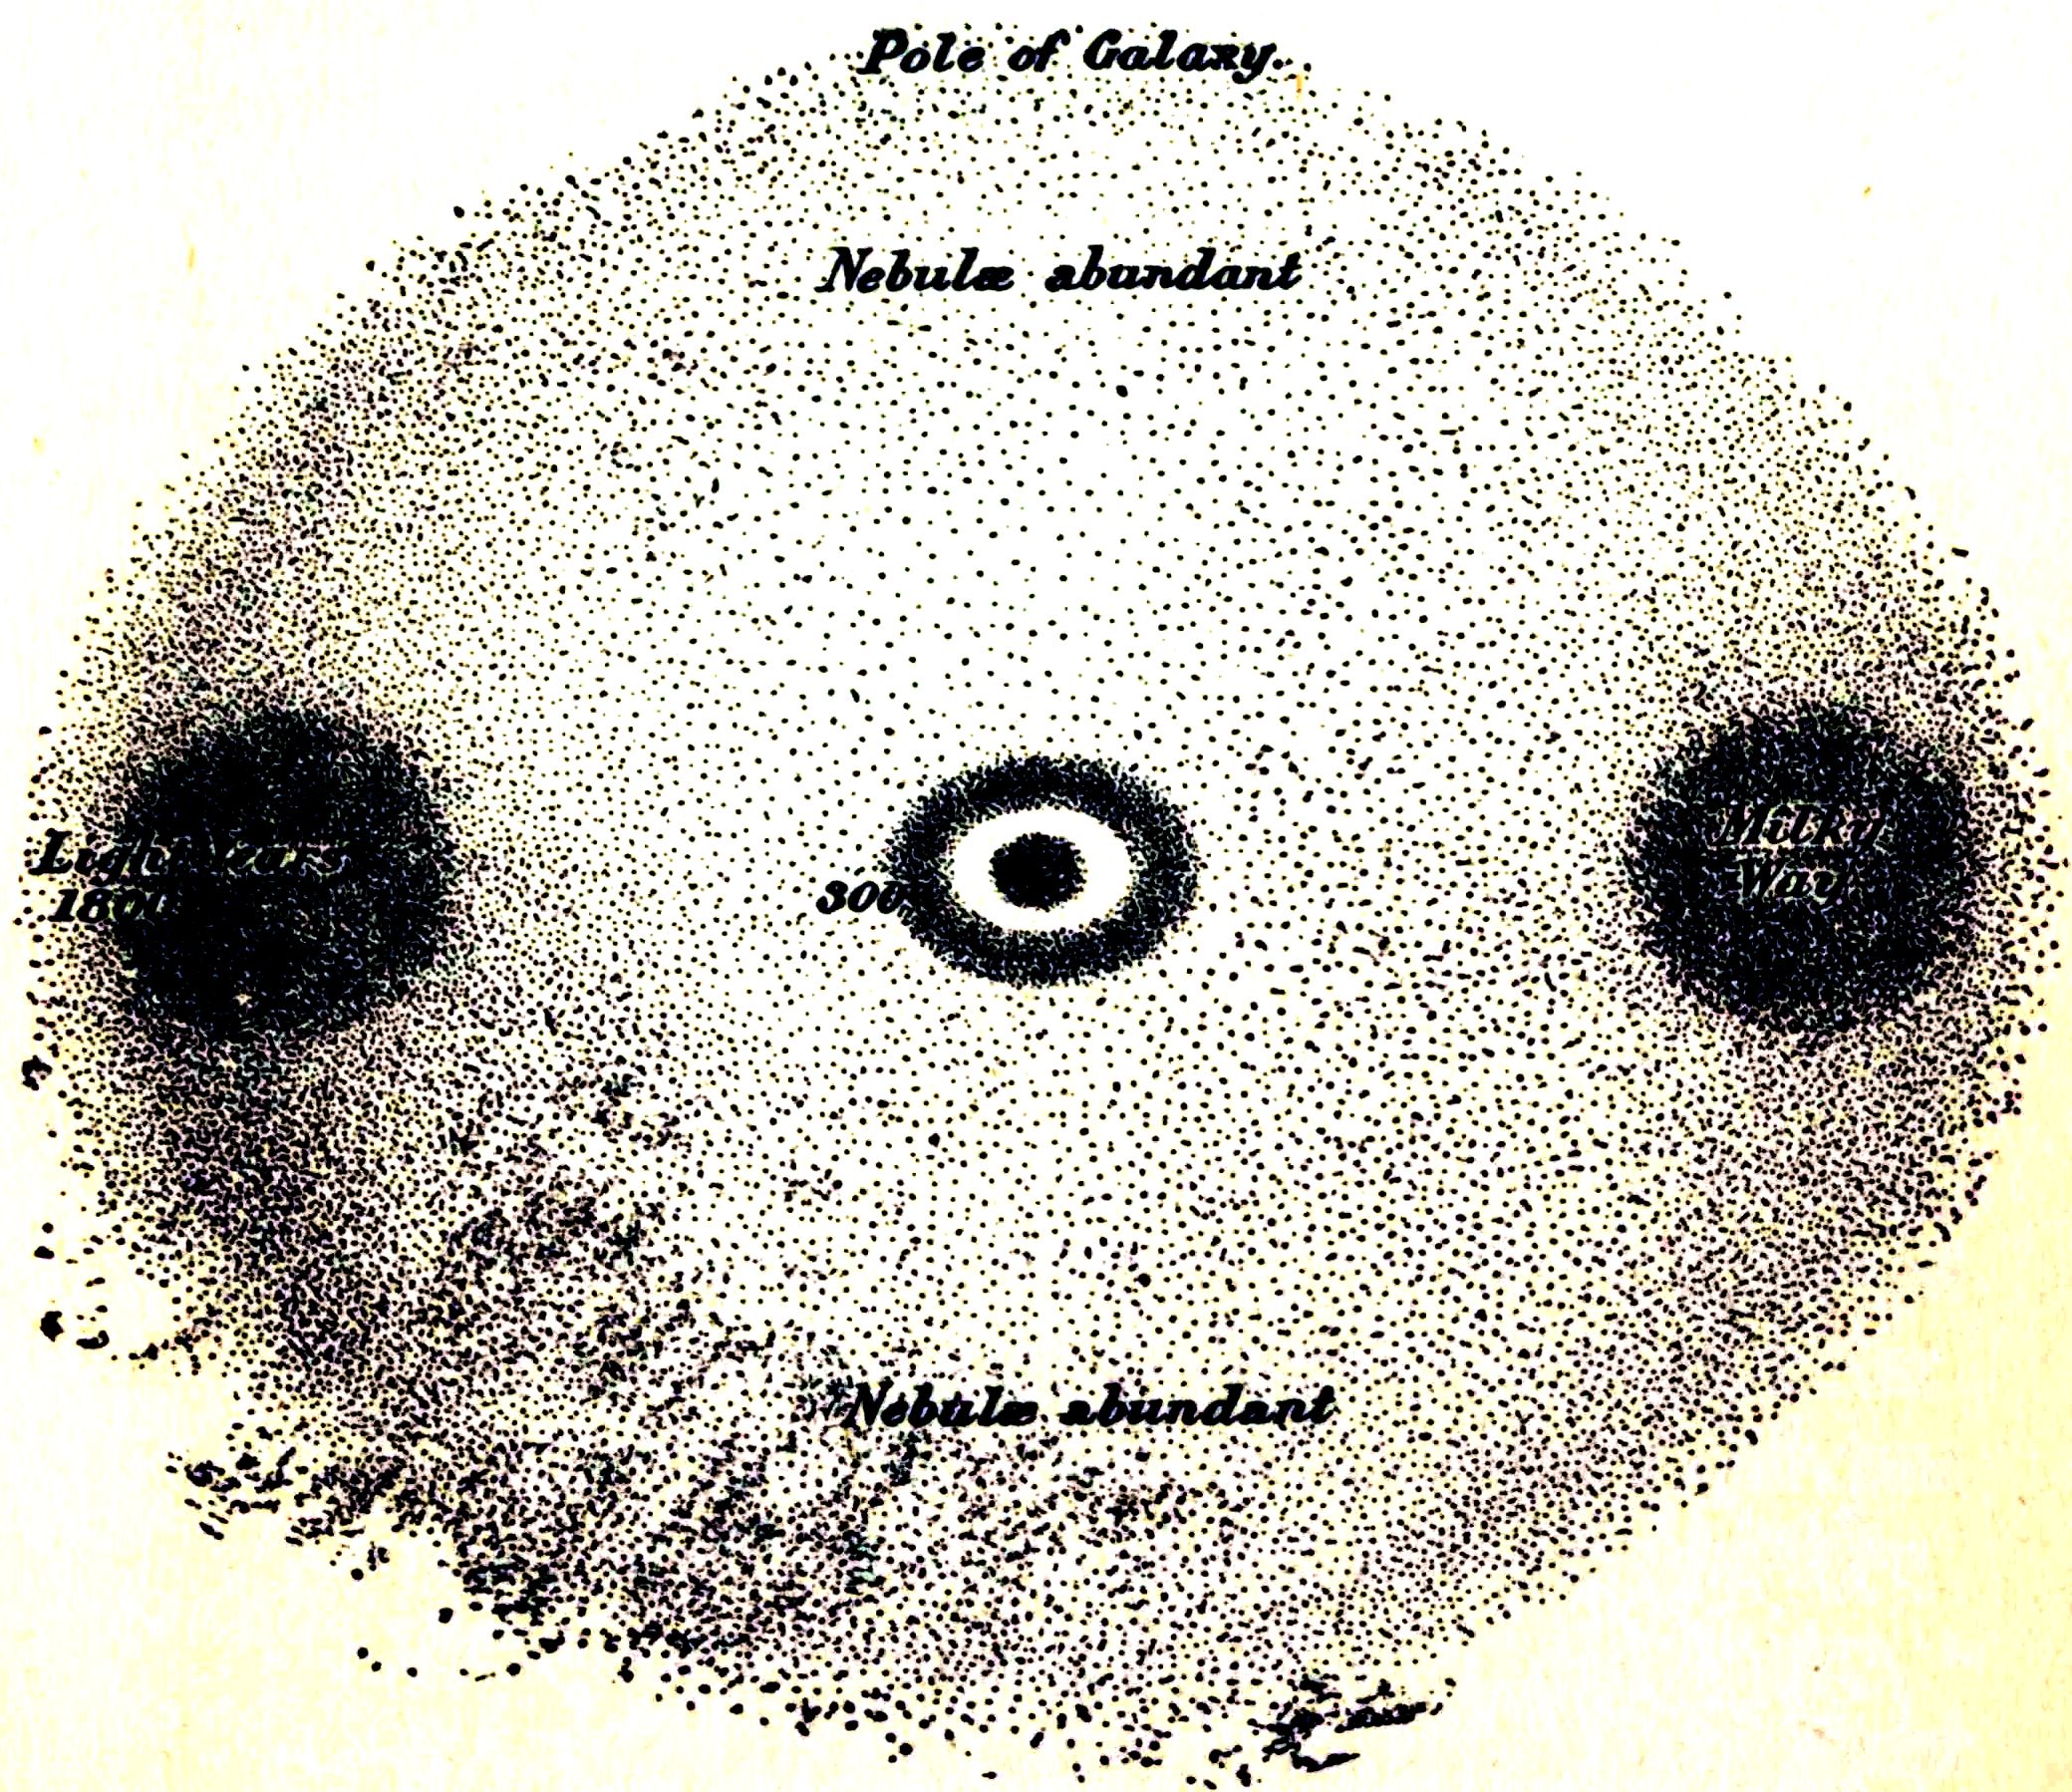 DIAGRAM OF STELLAR UNIVERSE (Section).
Section through Poles of Milky Way.